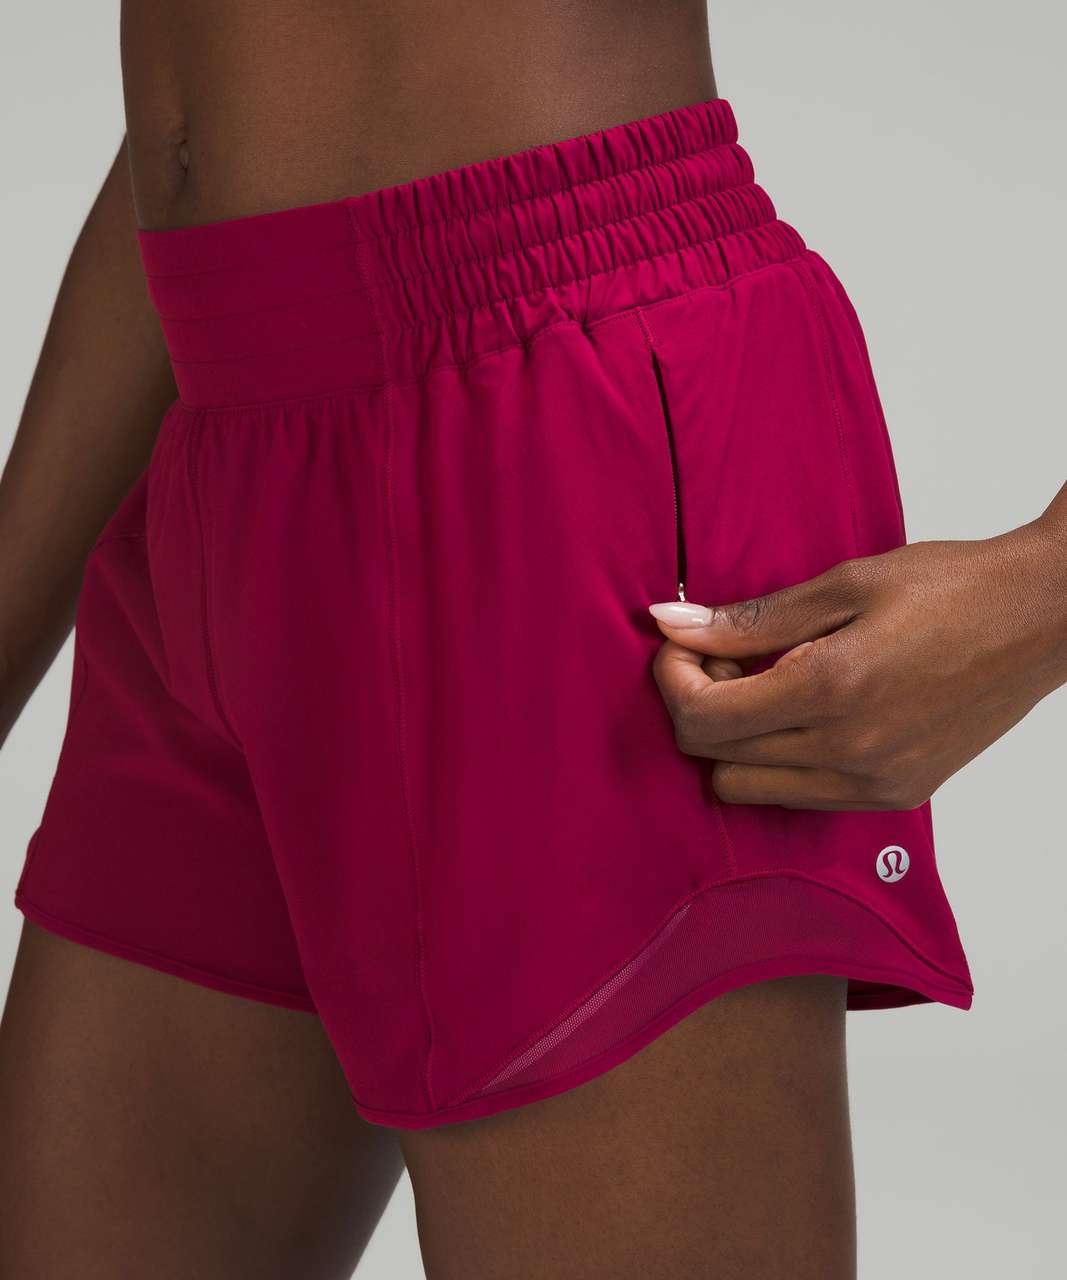 NEW Lululemon Hotty Hot High-Rise Lined Short 4 Sonic Pink Size 4-8-10